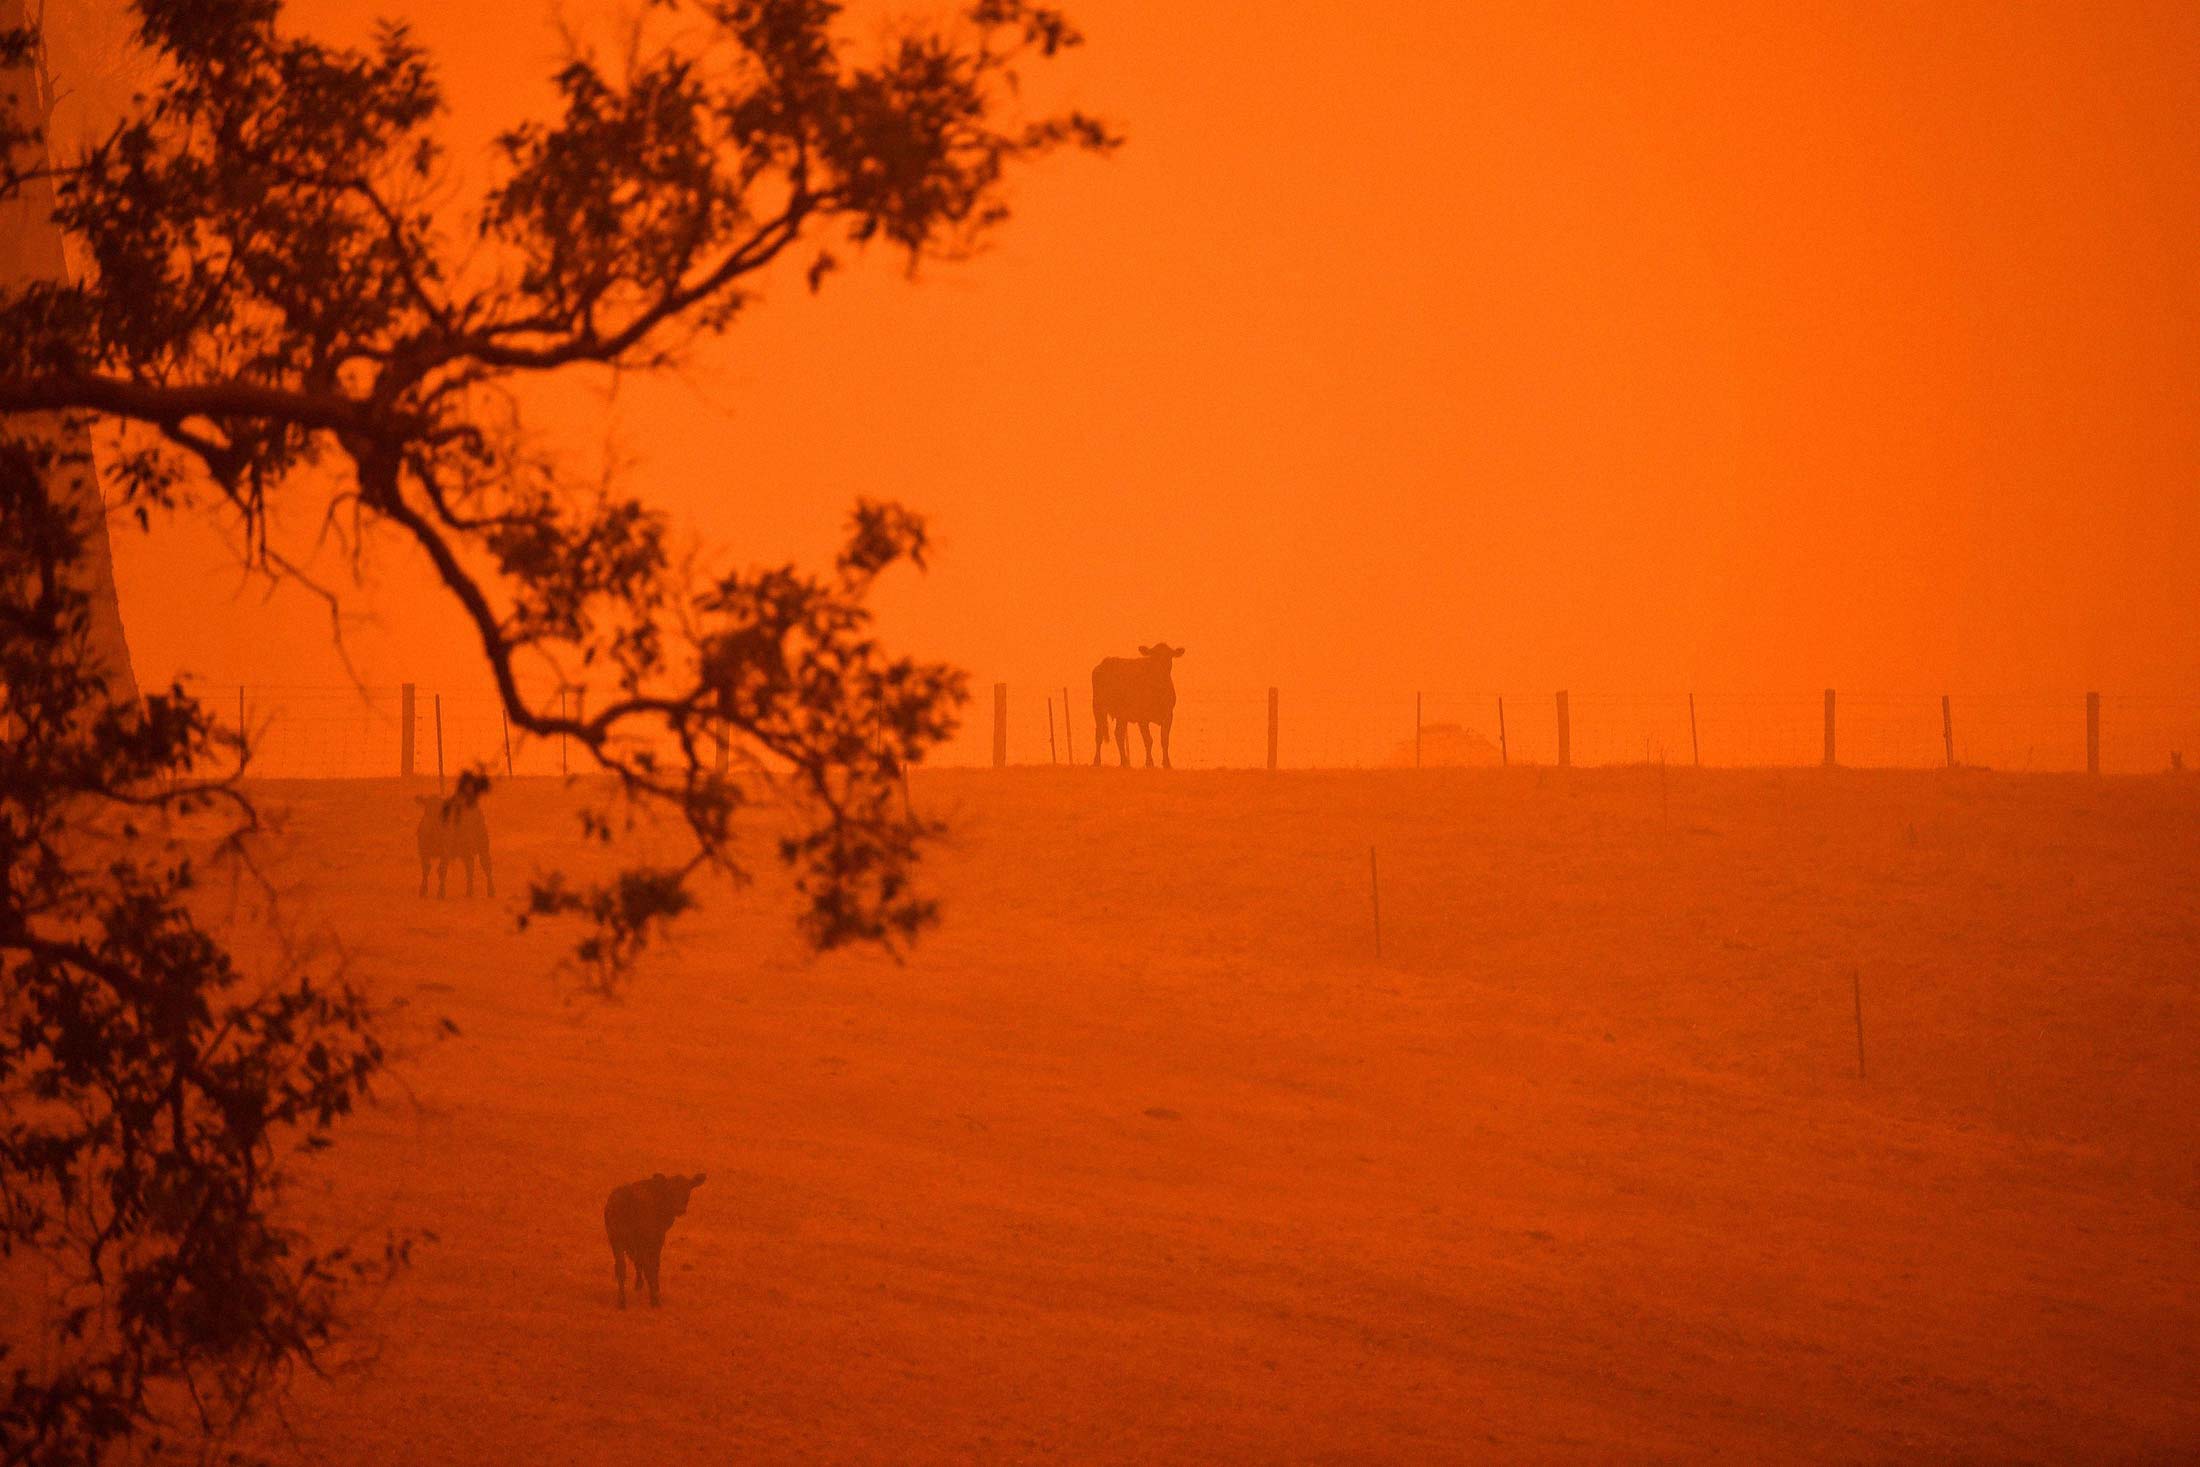 A sky reddened by bush fires in New South Wales.